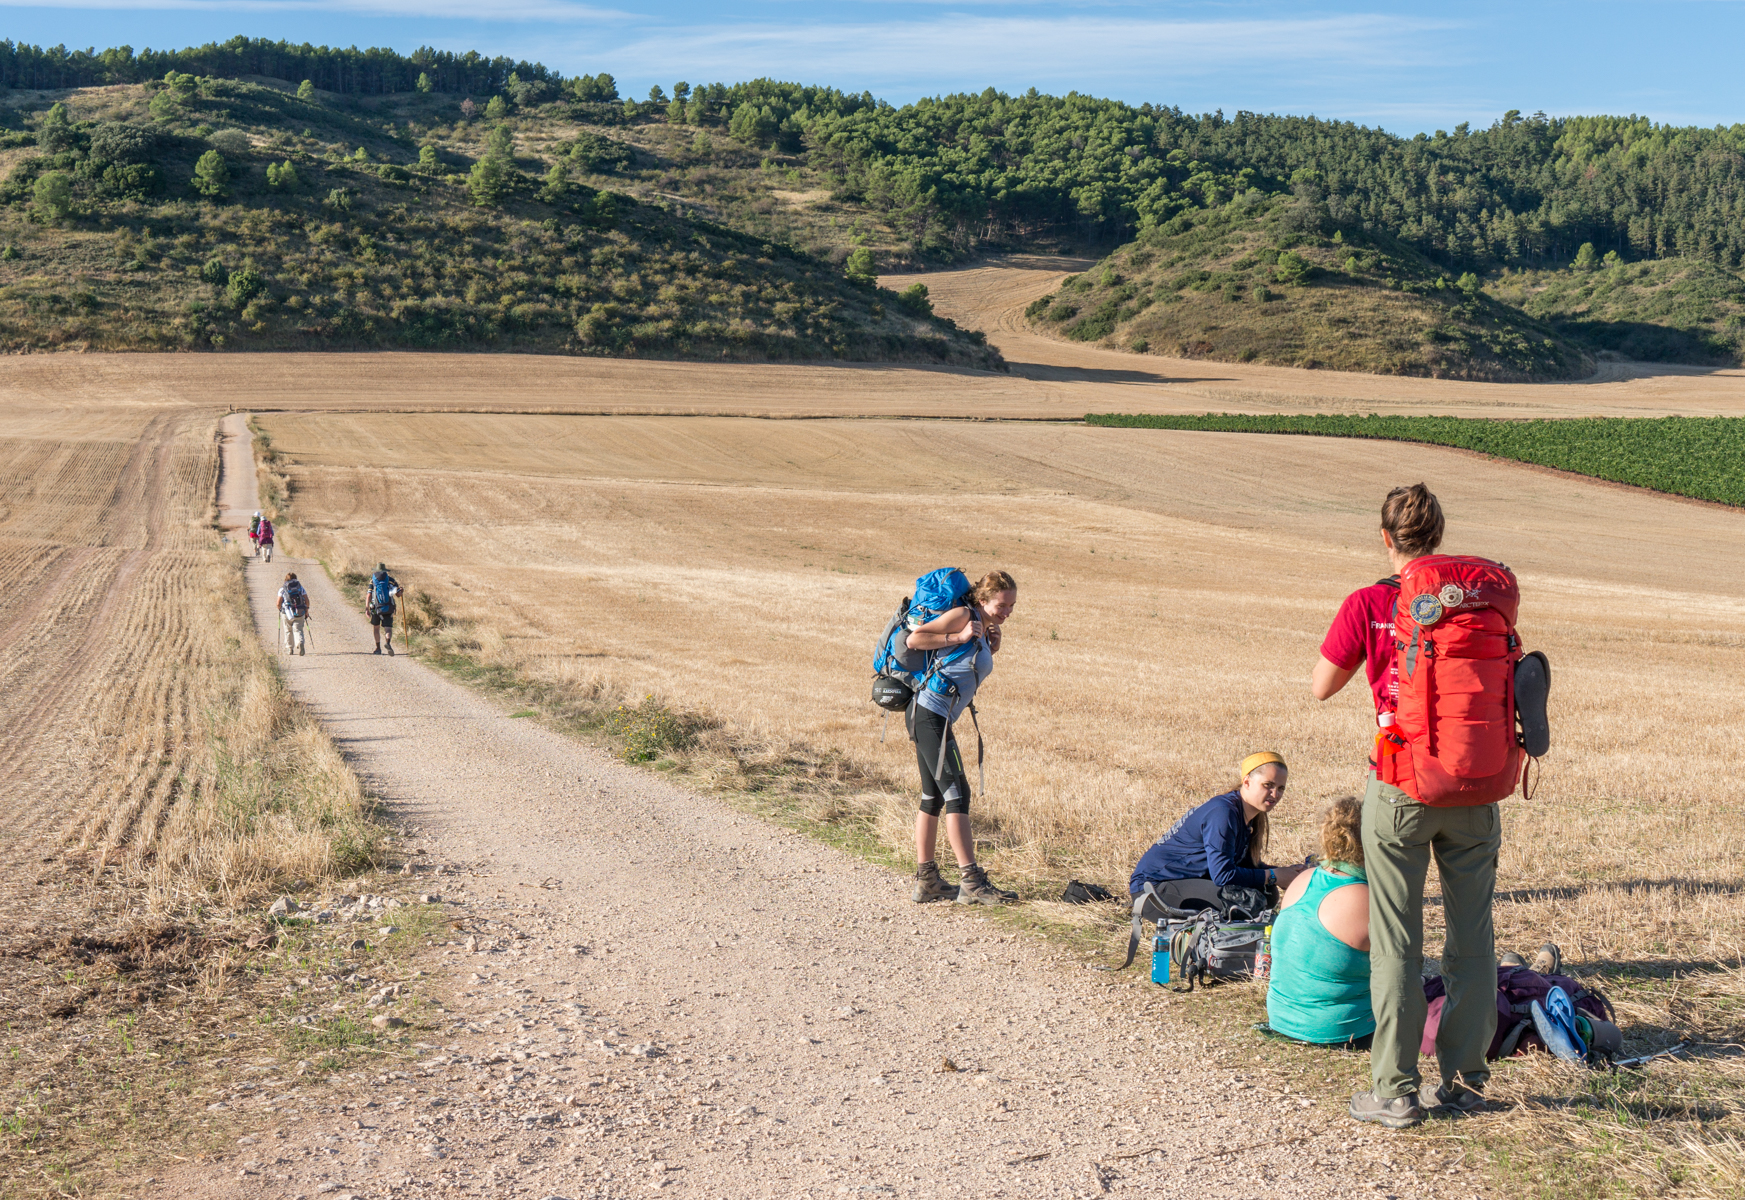 American college students on the Camino approximately 6 km west of Villamayor de Monjardín, Spain | Photo by Mike Hudak